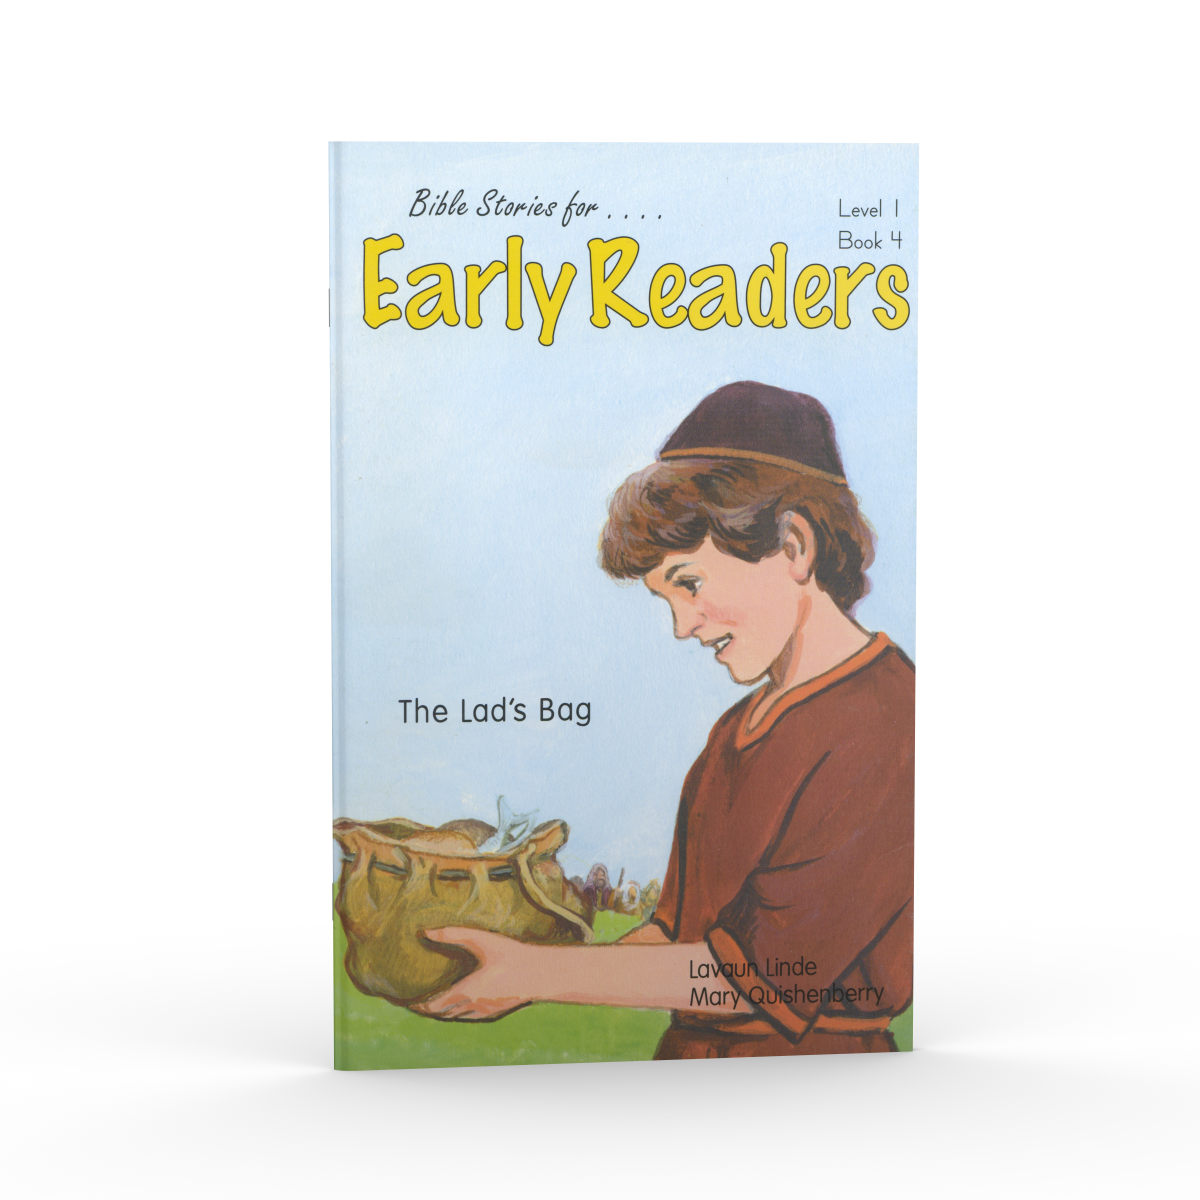 The Lad’s Bag (Bible Stories for Early Readers – Level 1, Book 4)